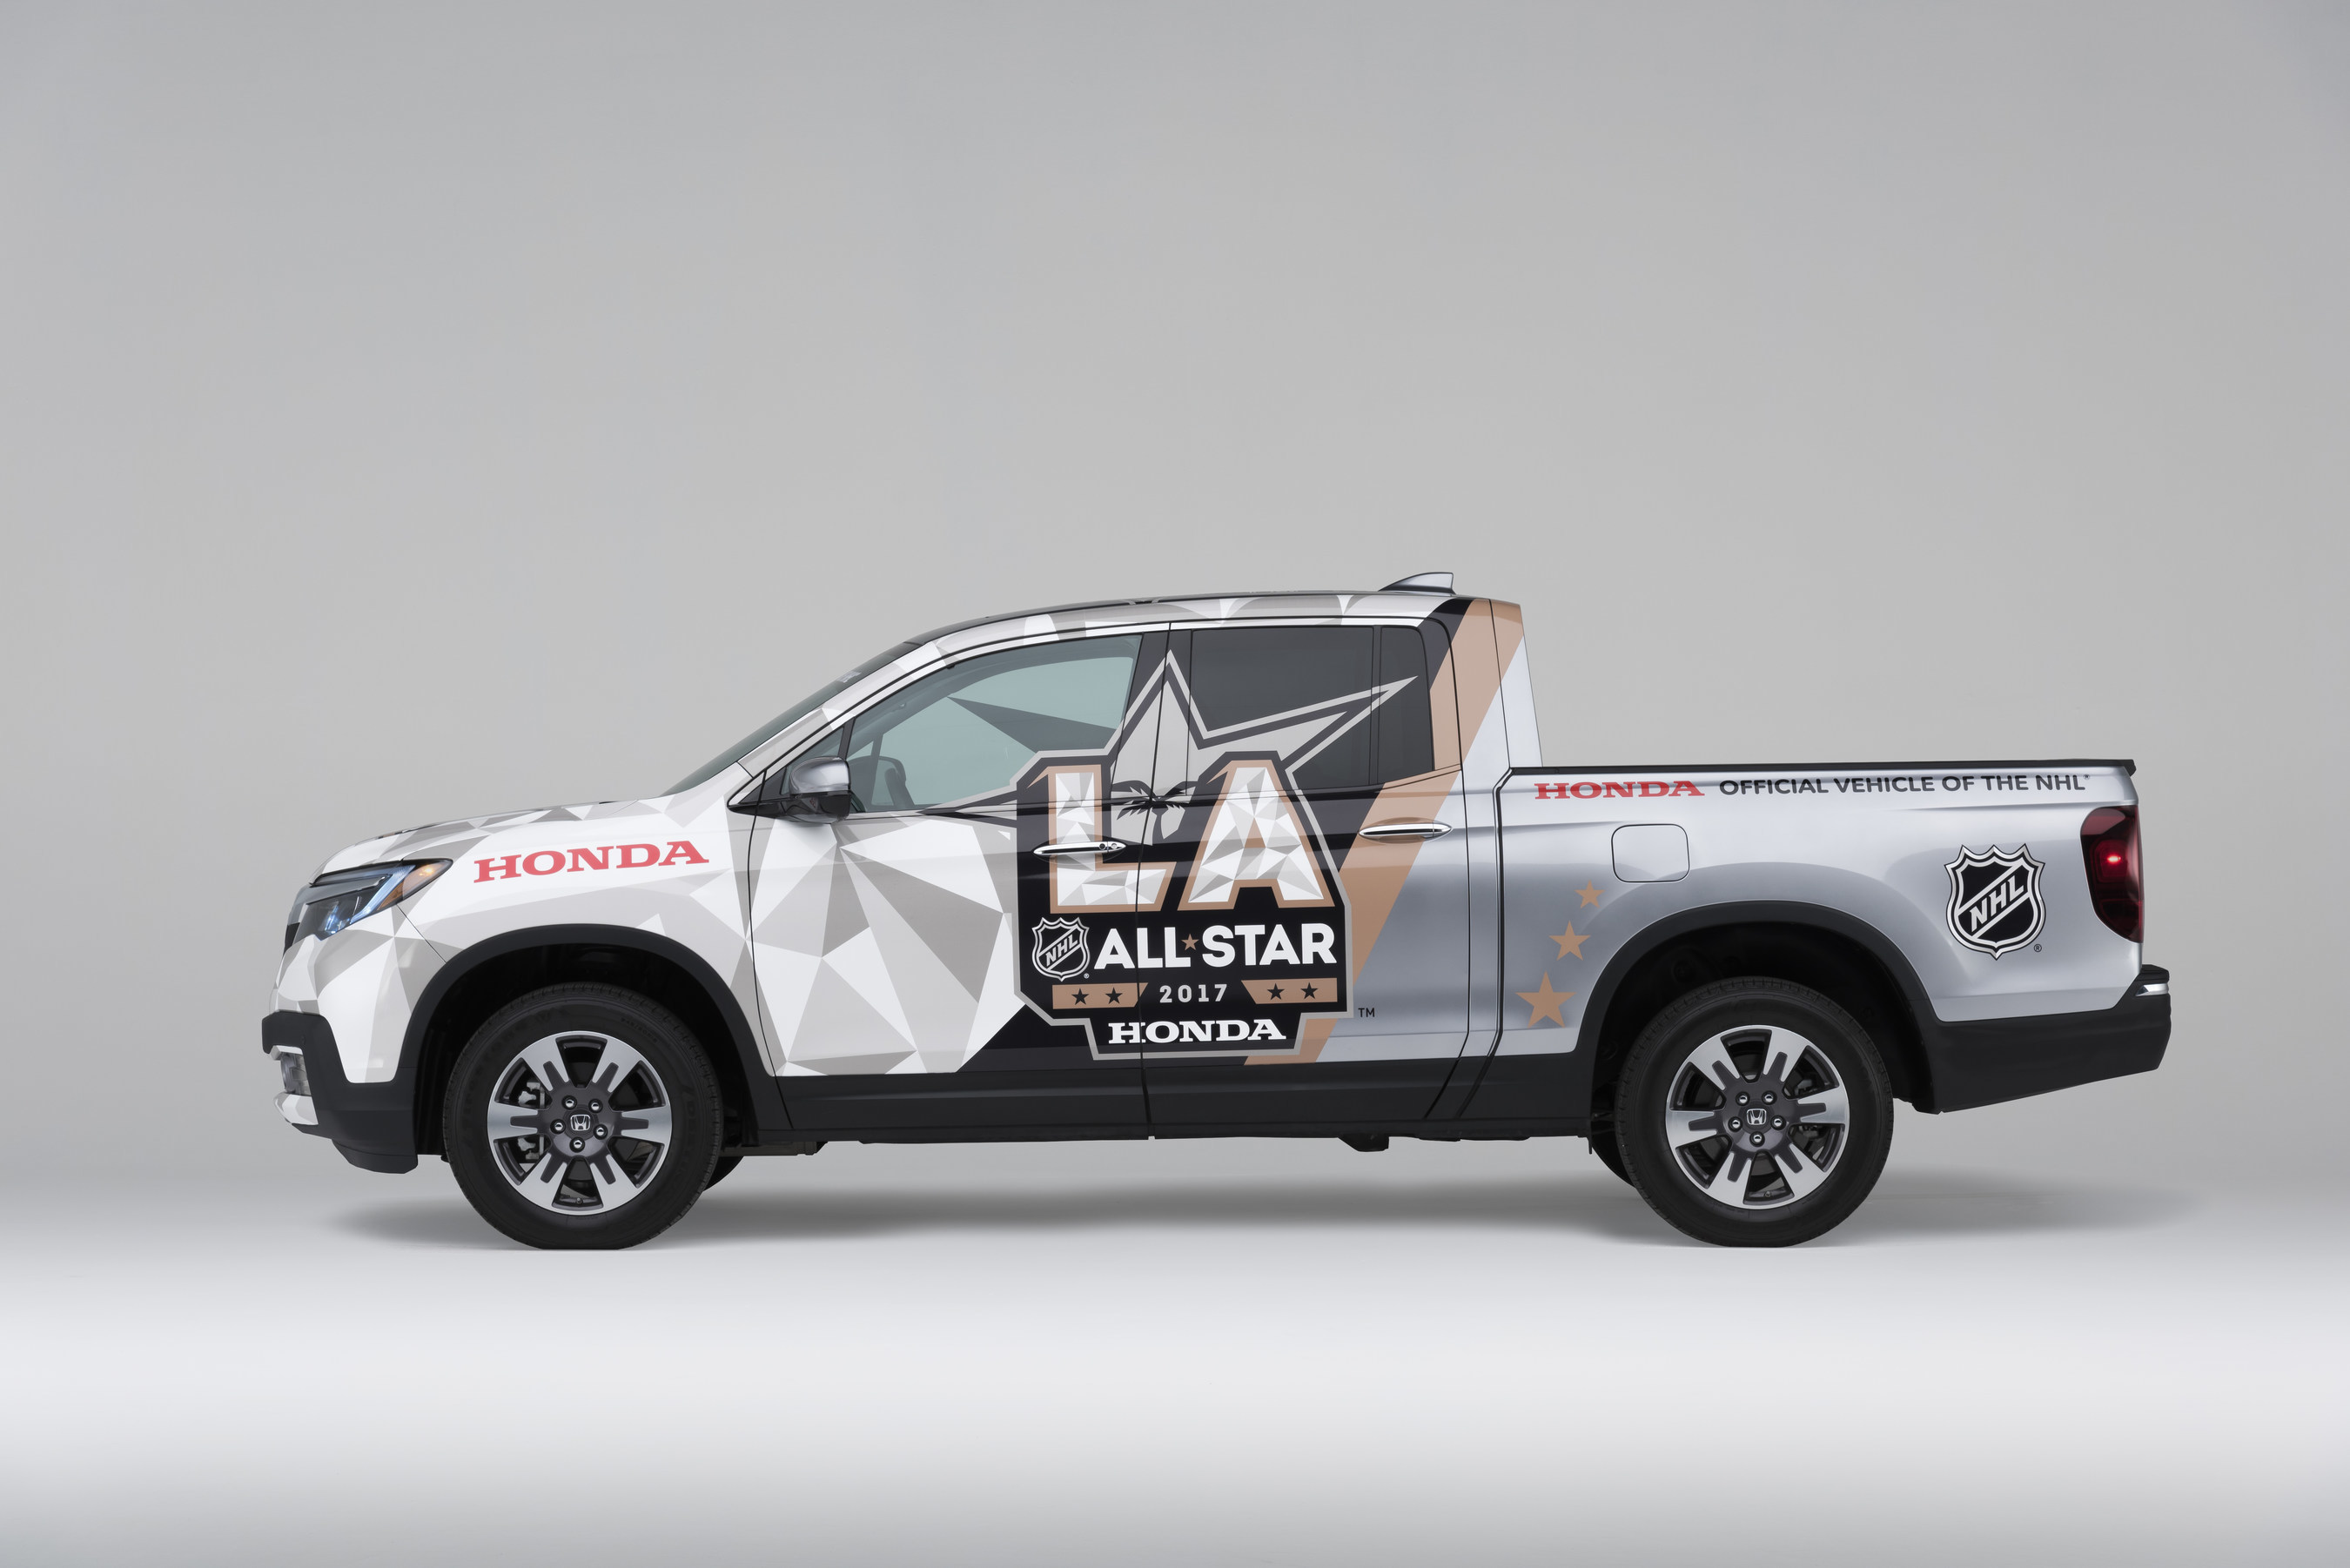 Honda Named Title Sponsor Of 2017 NHL All-Star Game In Los Angeles, Expands Commitment As The Official Vehicle Of The NHL